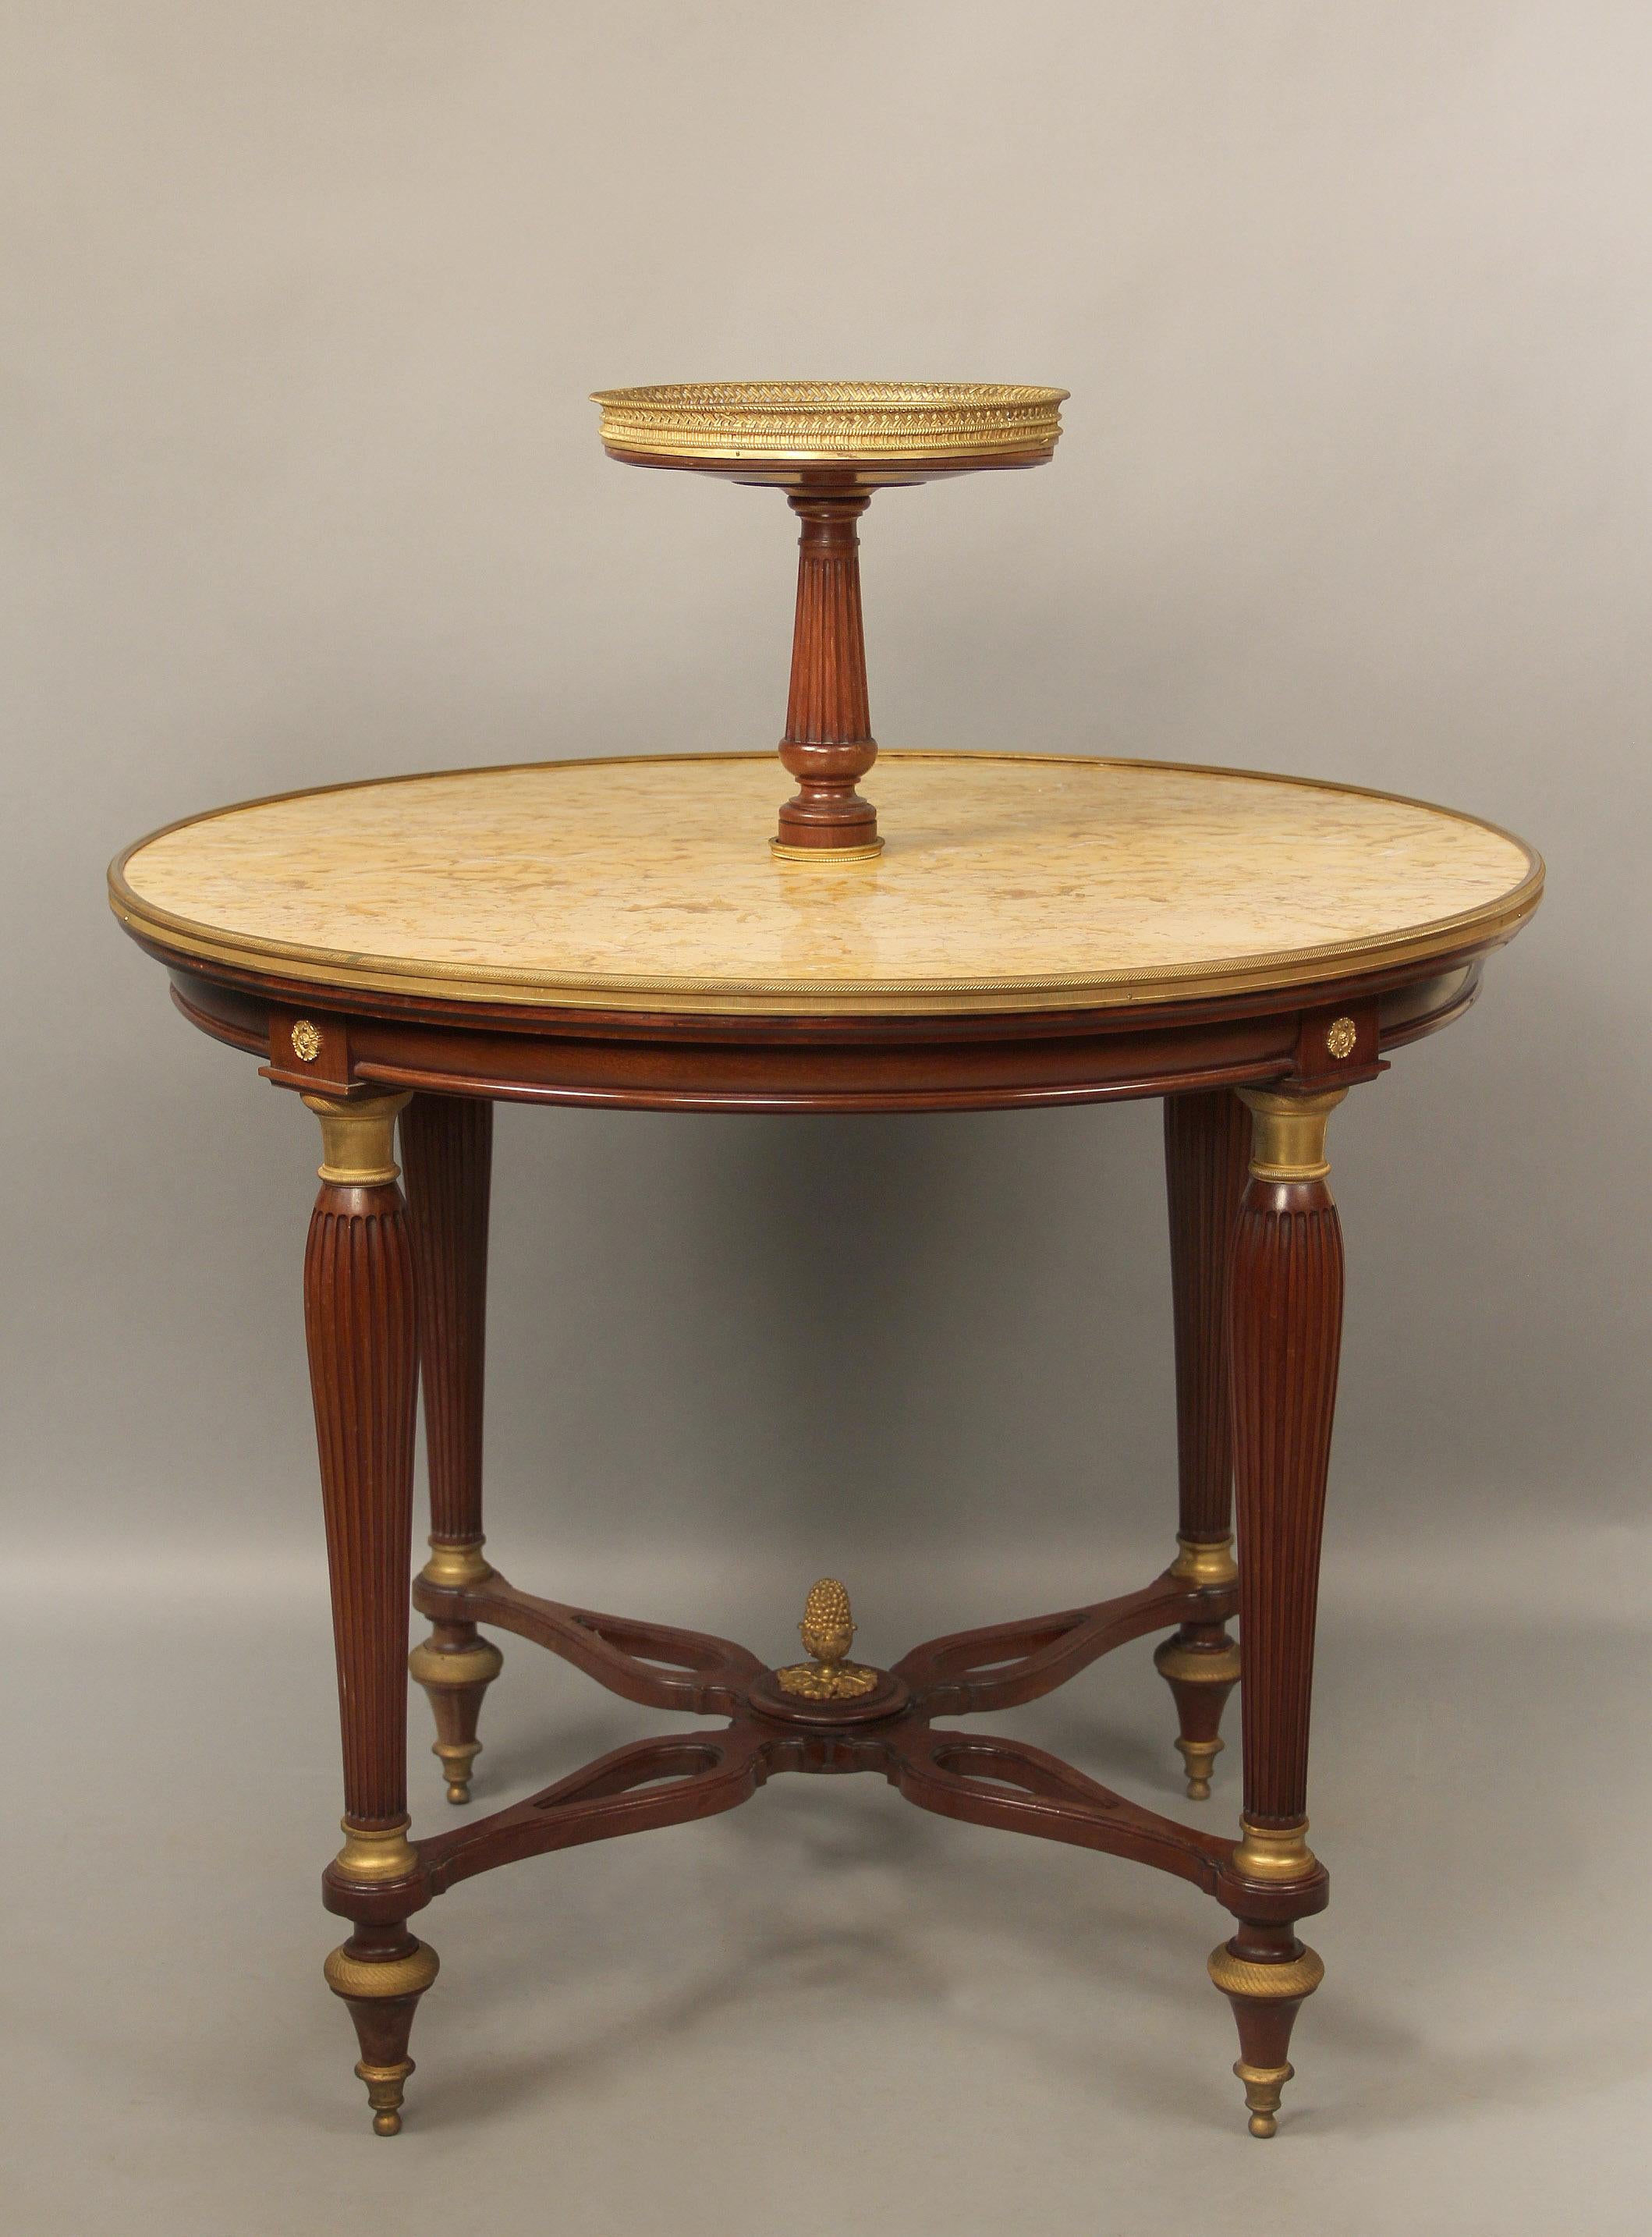 An interesting late 19th century Louis XVI style gilt bronze-mounted two-tier pastry table

Round marble-top table centered with an upper tier with a pierced bronze rim, the four carved legs centered by a bow shaped stretcher with a bronze